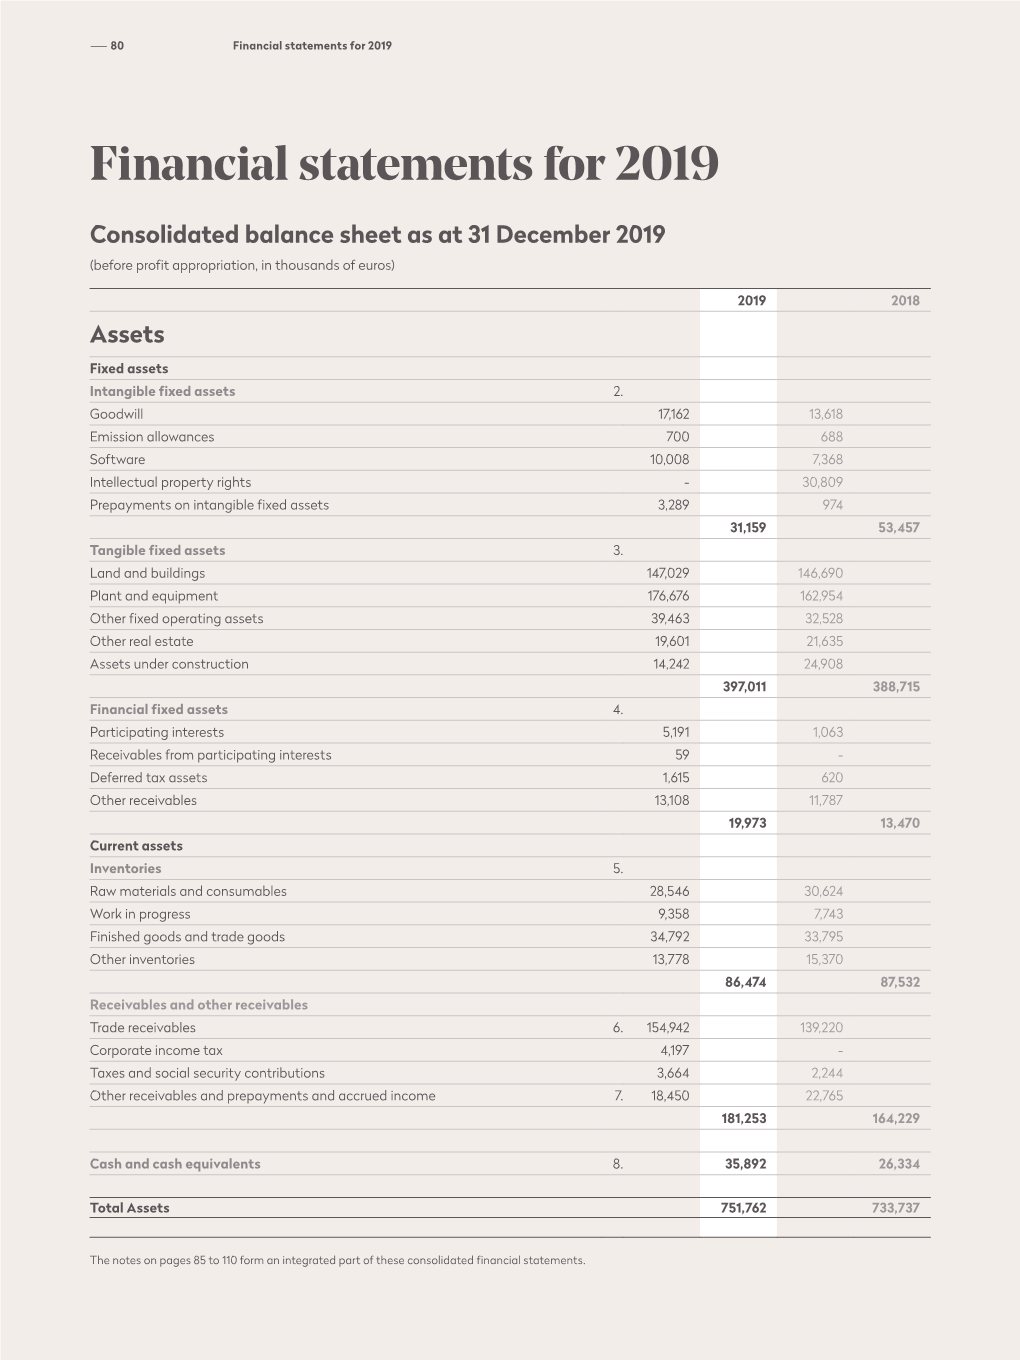 Financial Statements for 2019